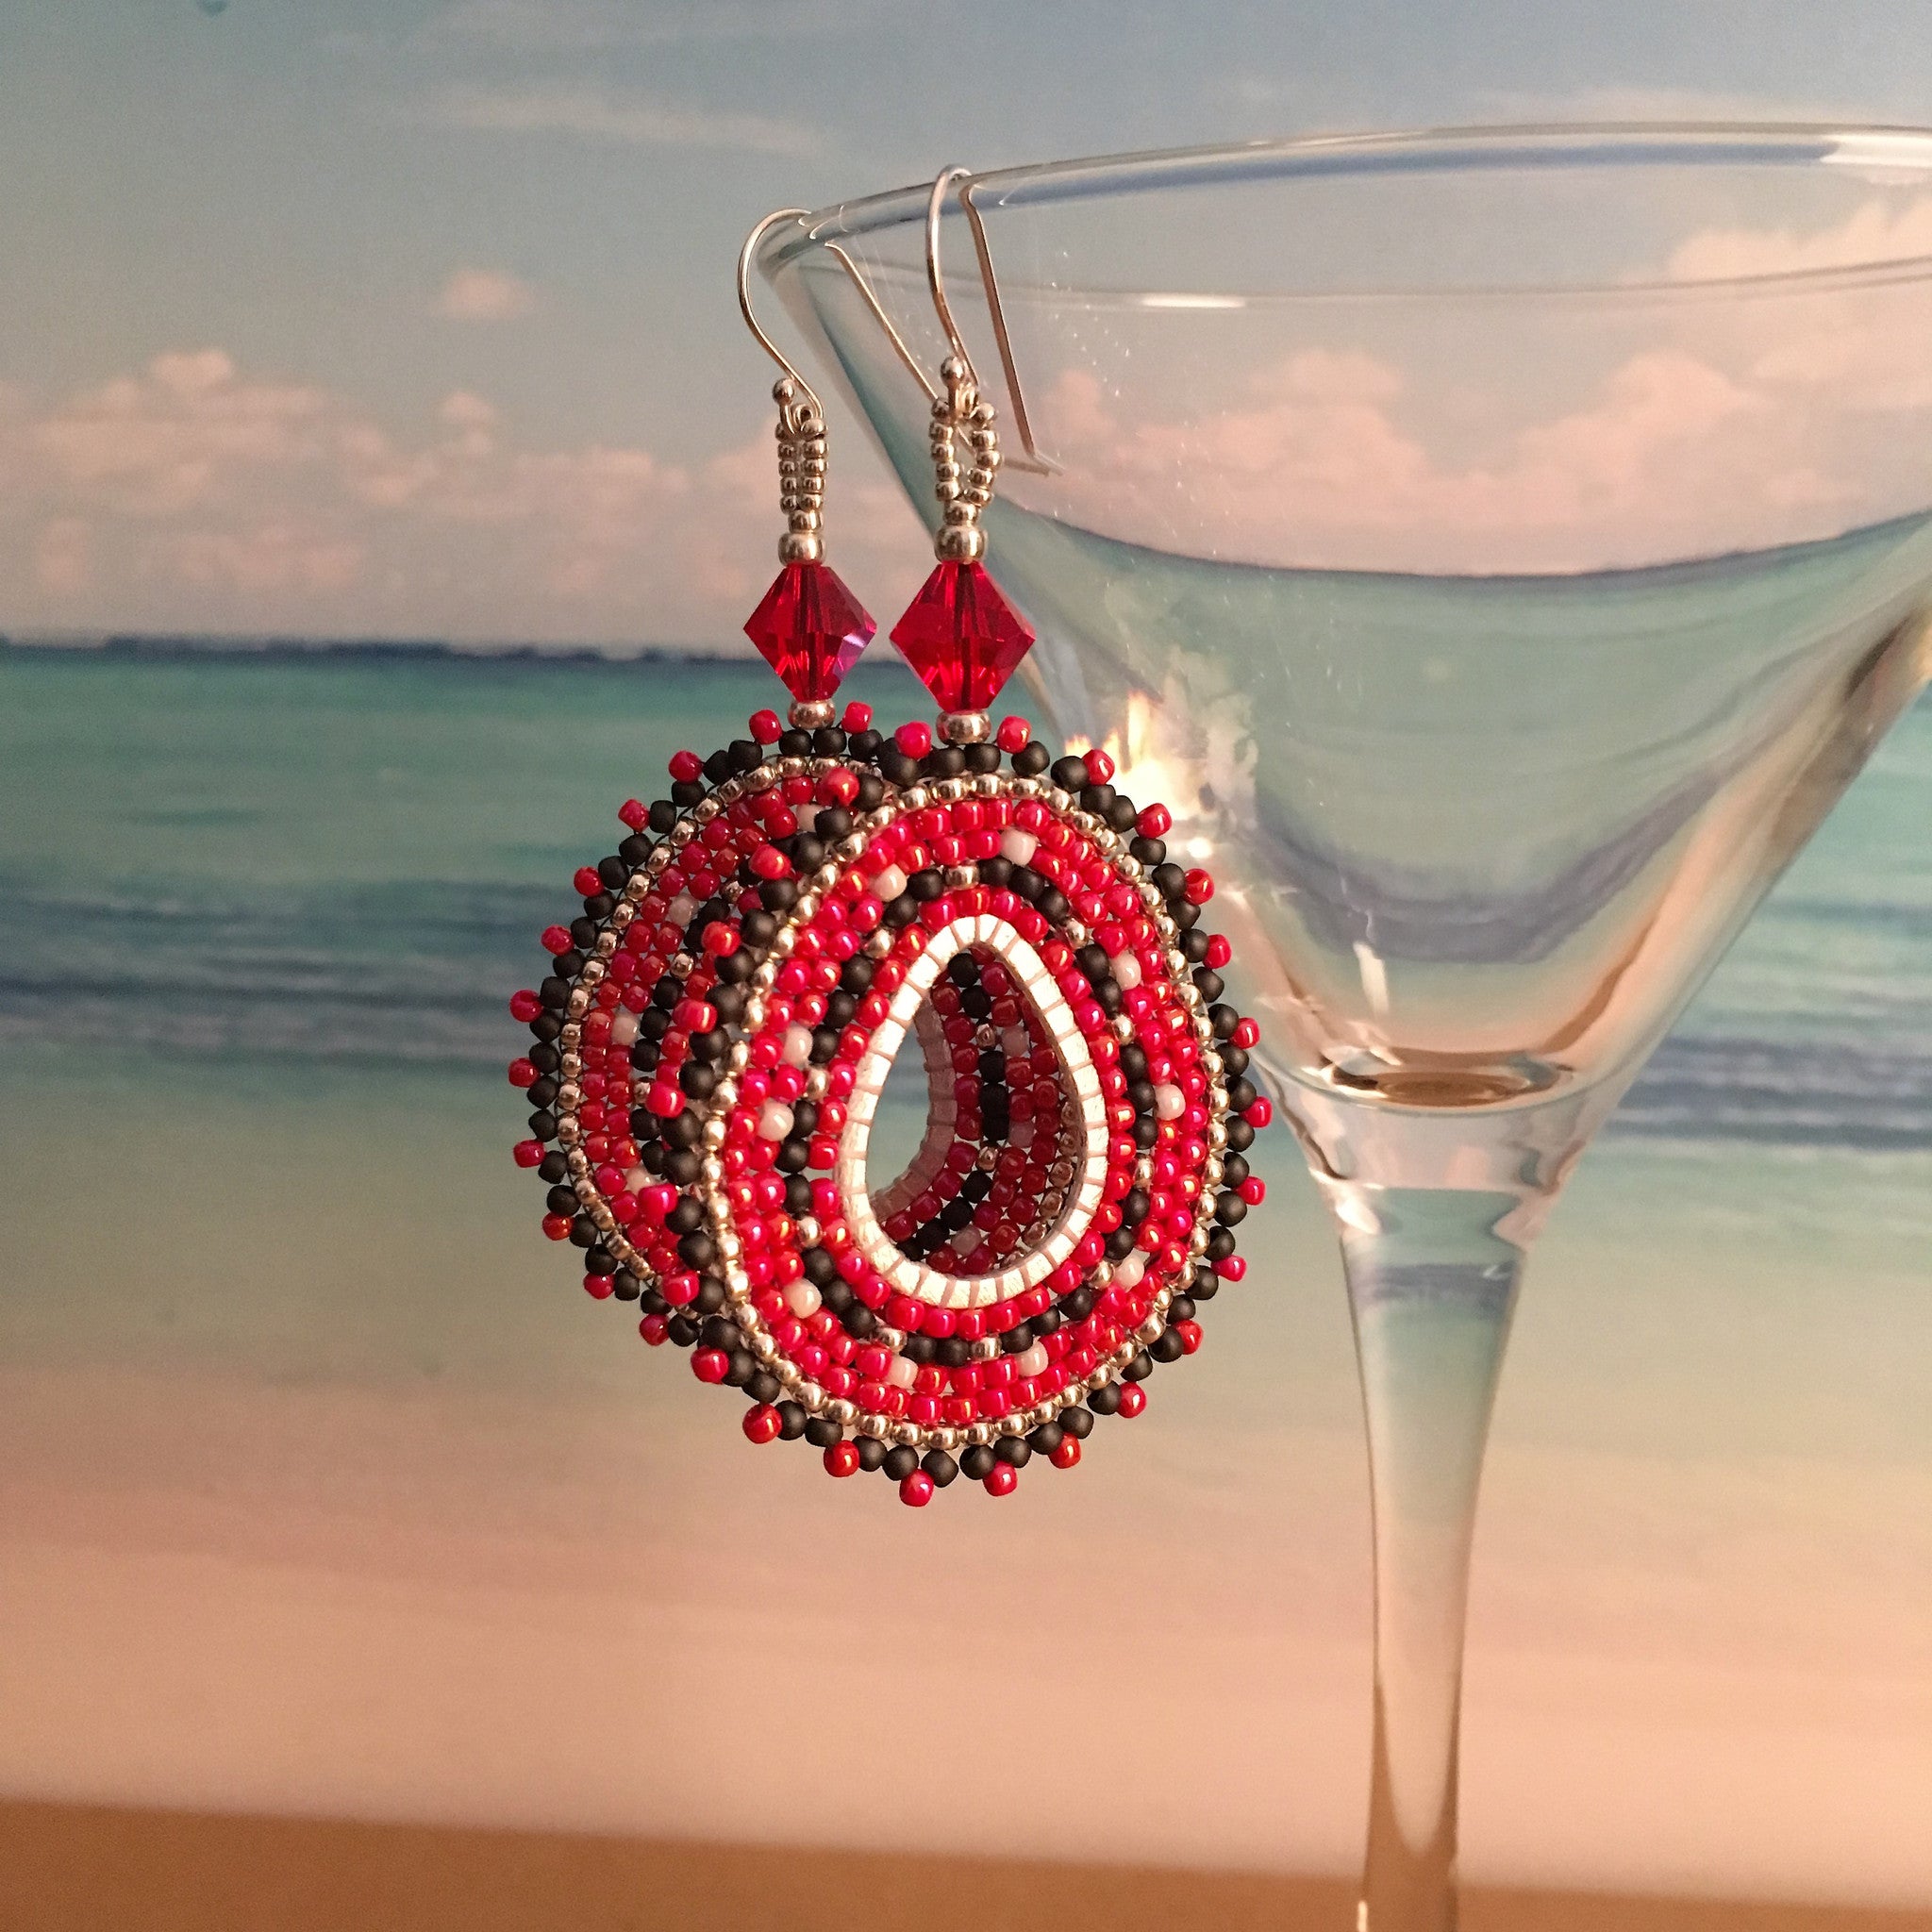 Rutgers Scarlet Knights earring colors Red Black White Silver beaded custom earrings made in New Jersey Swarovski crystals oval hoops prom bridal beaded by the beach 